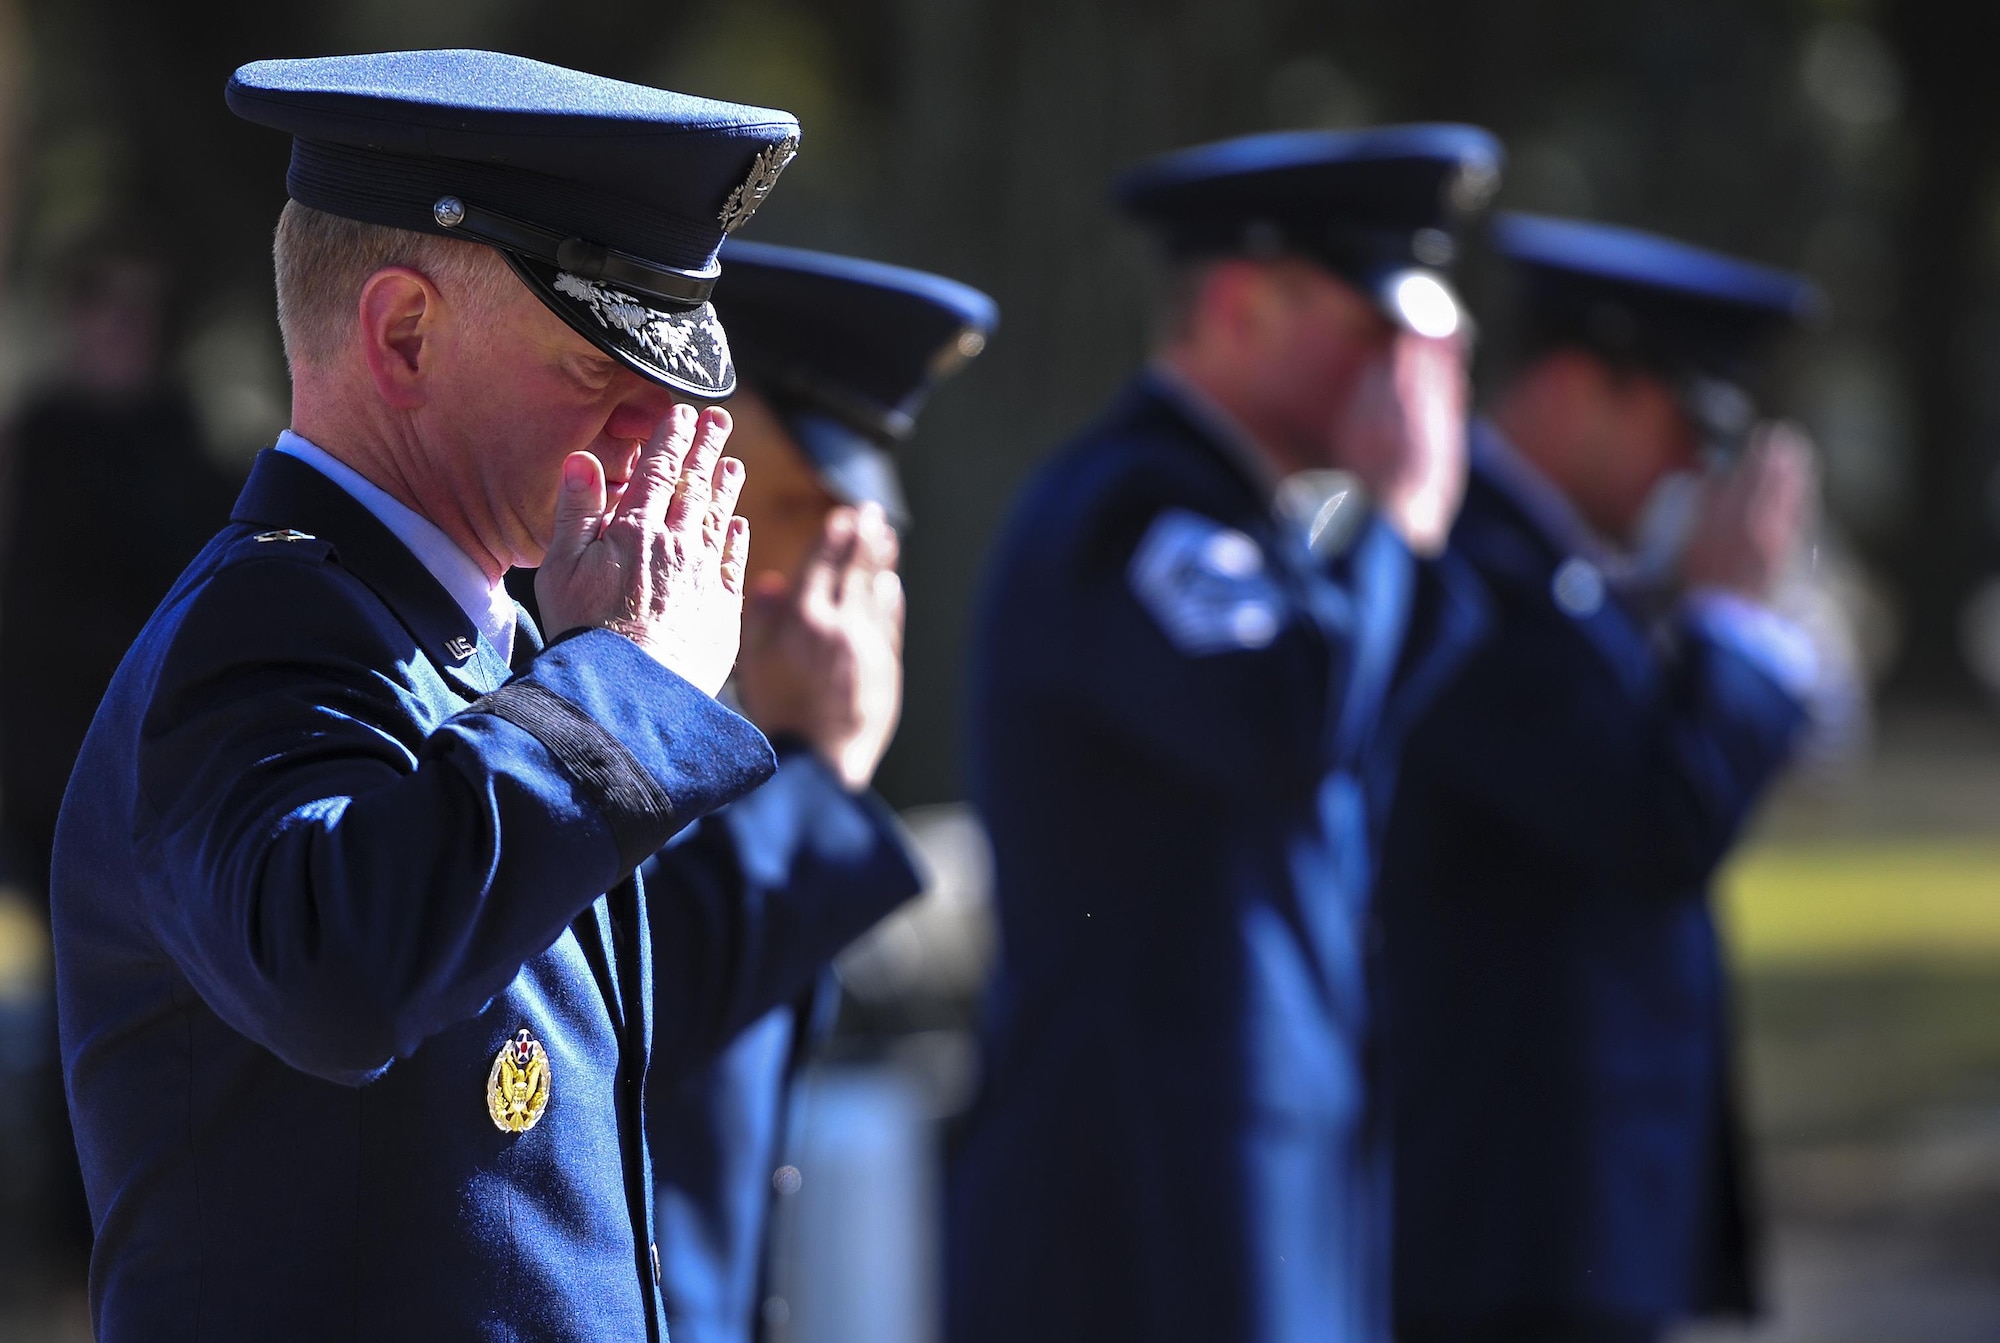 Maj. Gen. Mark Hicks, Air Force Special Operations Command director of operations, salutes the graves of Spirit 03 crew members during a remembrance ceremony at Barrancas National Cemetery on Naval Air Station Pensacola, Fla., Jan. 31, 2015. Losing Spirit 03 and its crew members was the largest single loss by an Air Force unit during Operation Desert Storm. (U.S. Air Force photo/Airman 1st Class Jeff Parkinson)